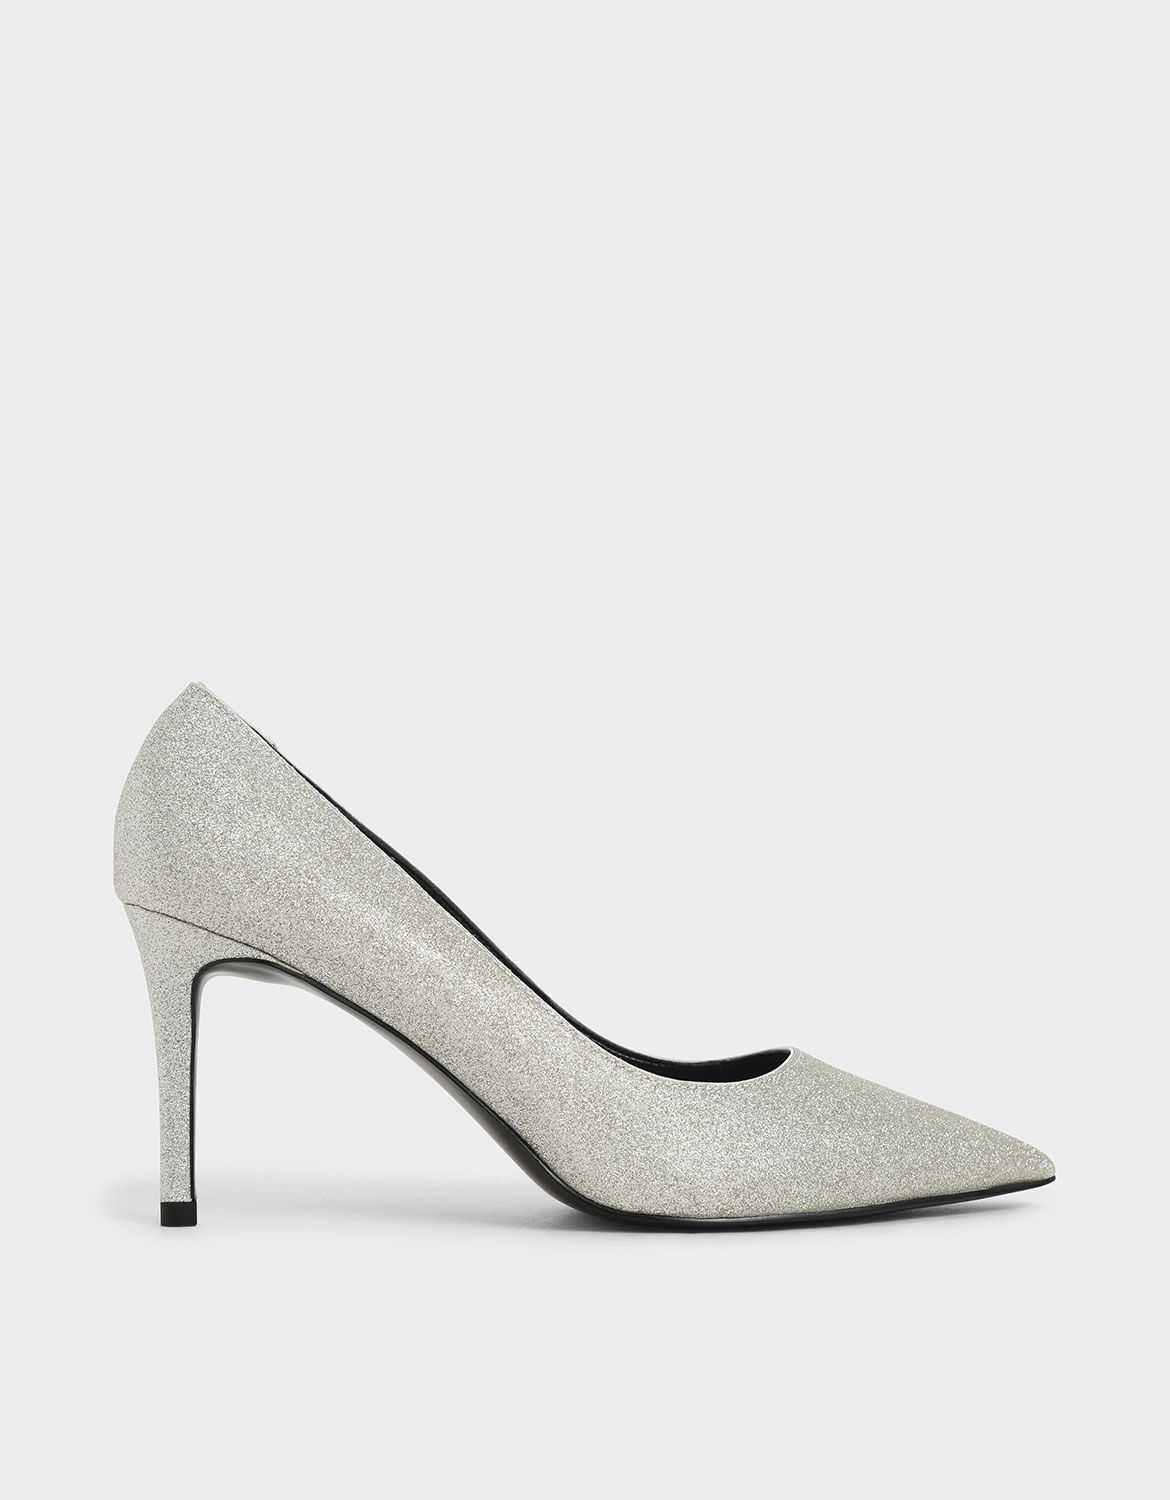 silver pointed toe pumps